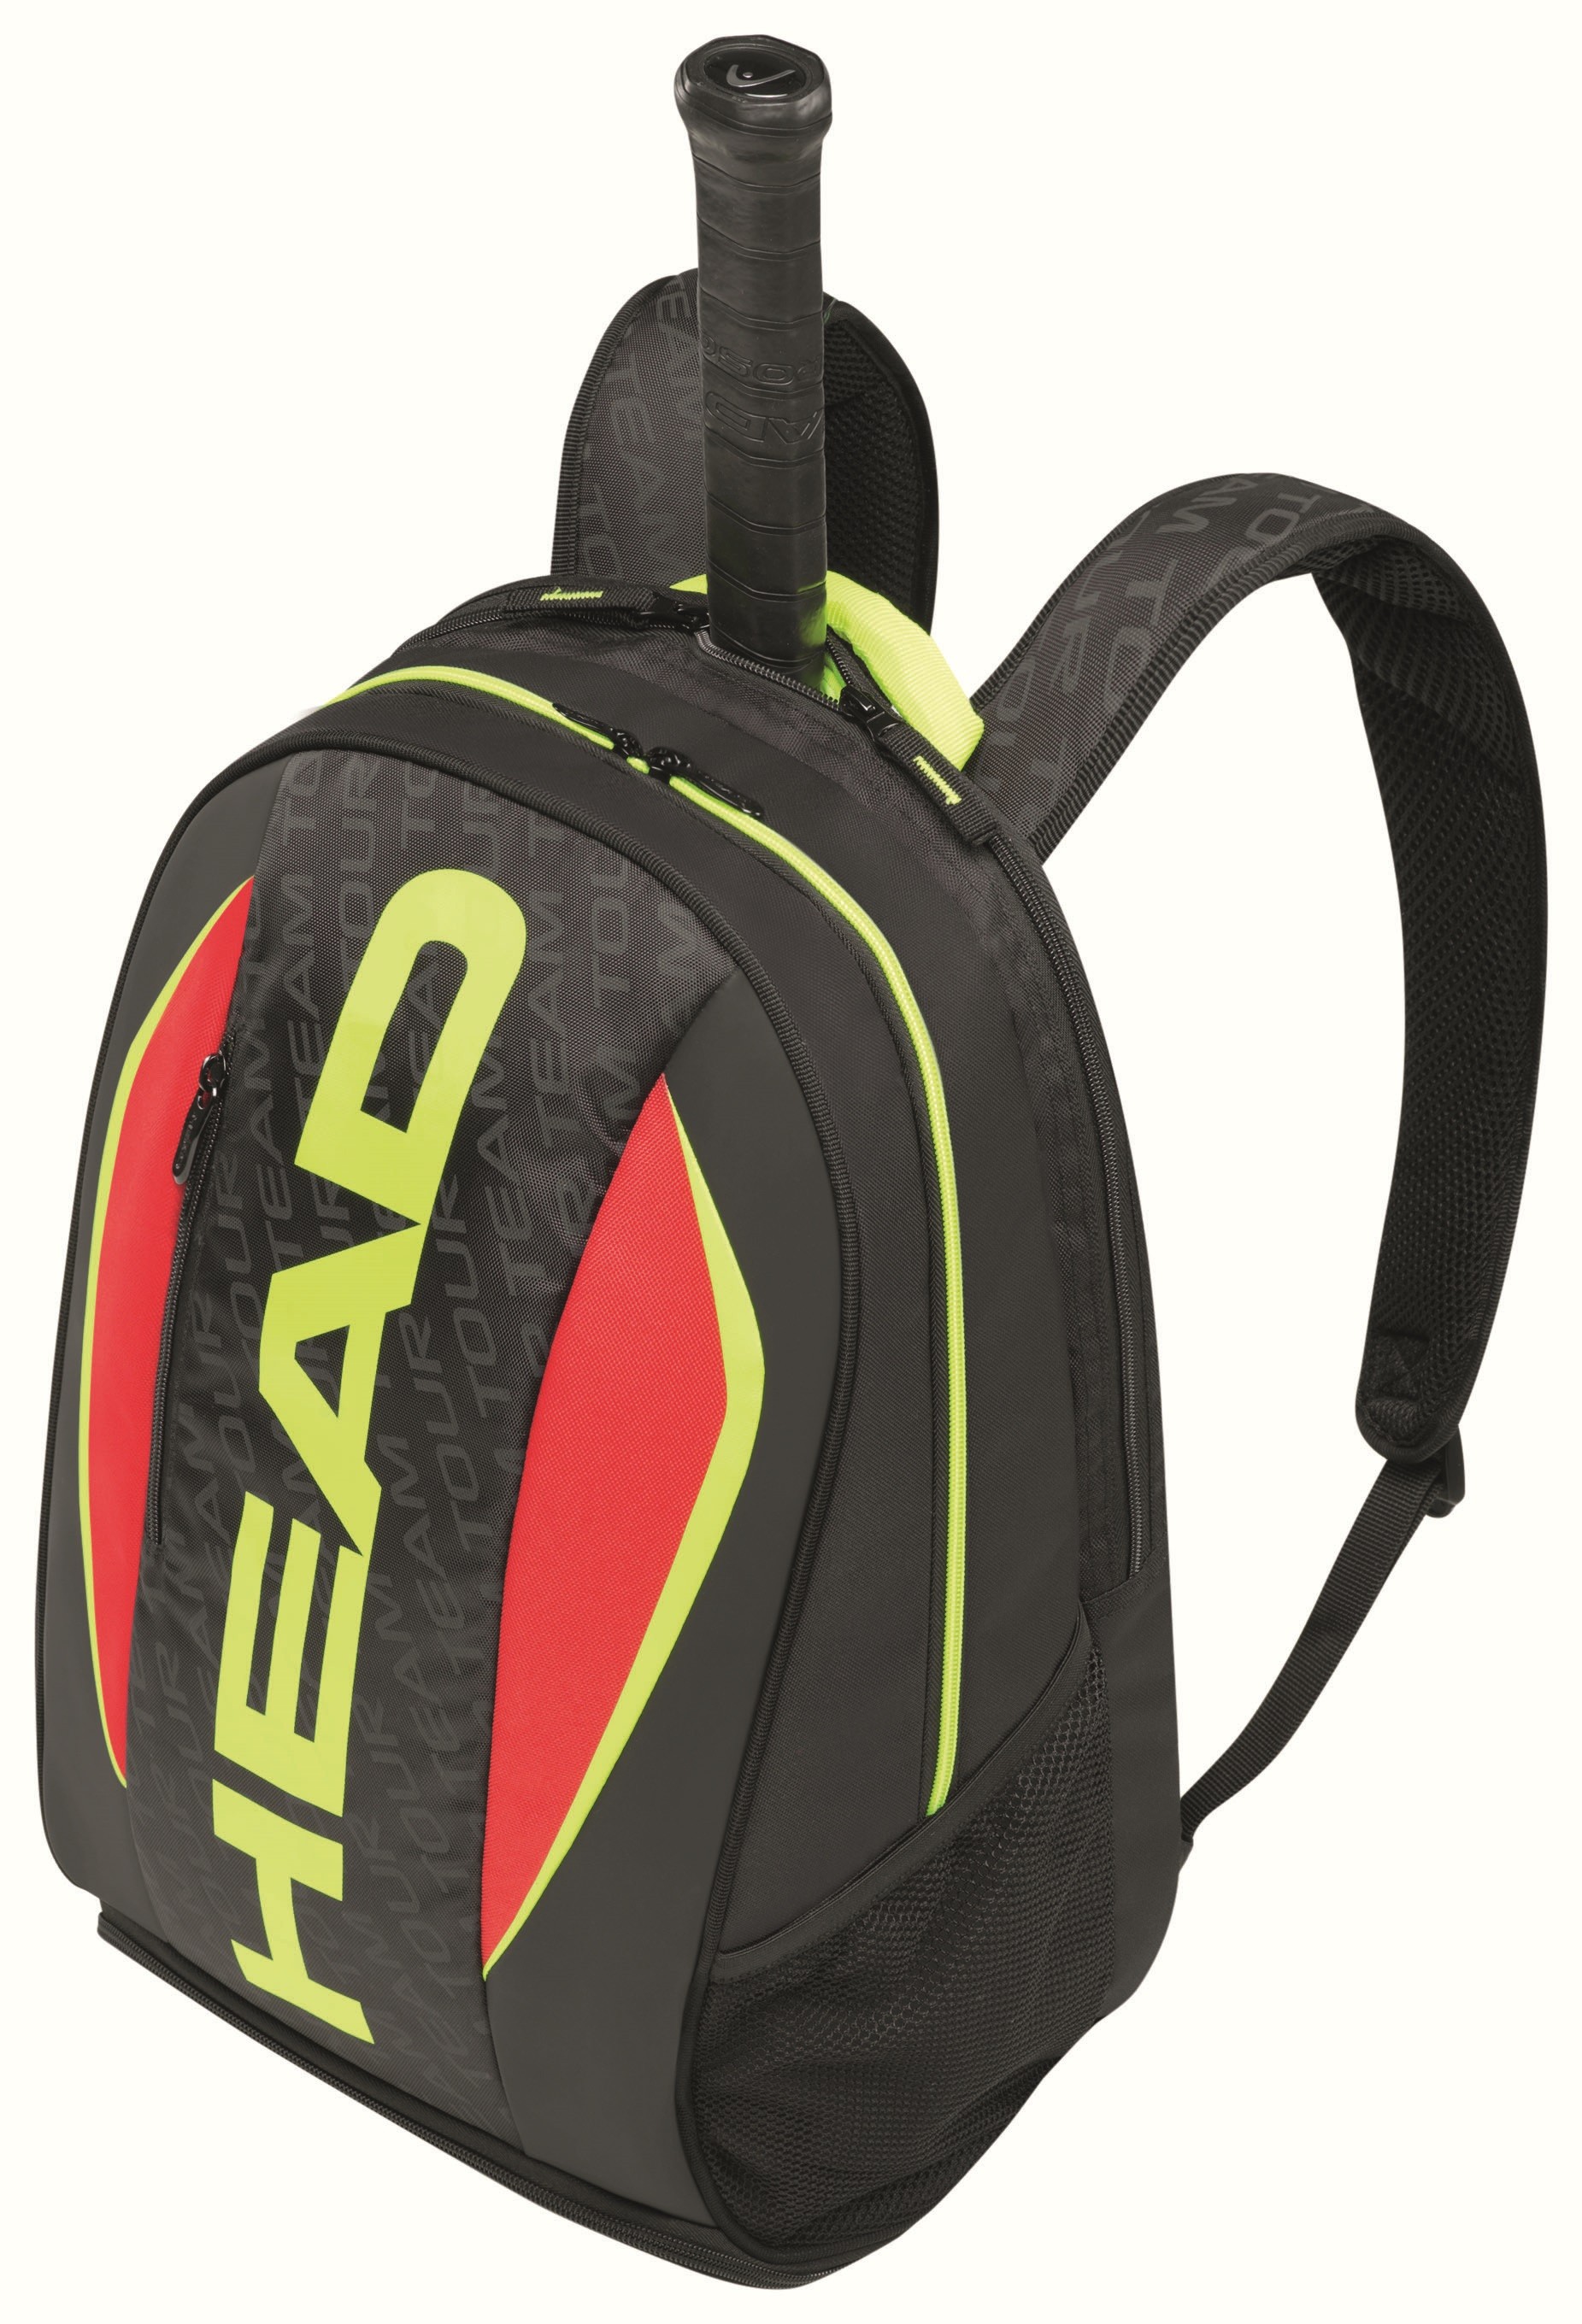 Tenisový batoh HEAD Extreme black/lime/red new